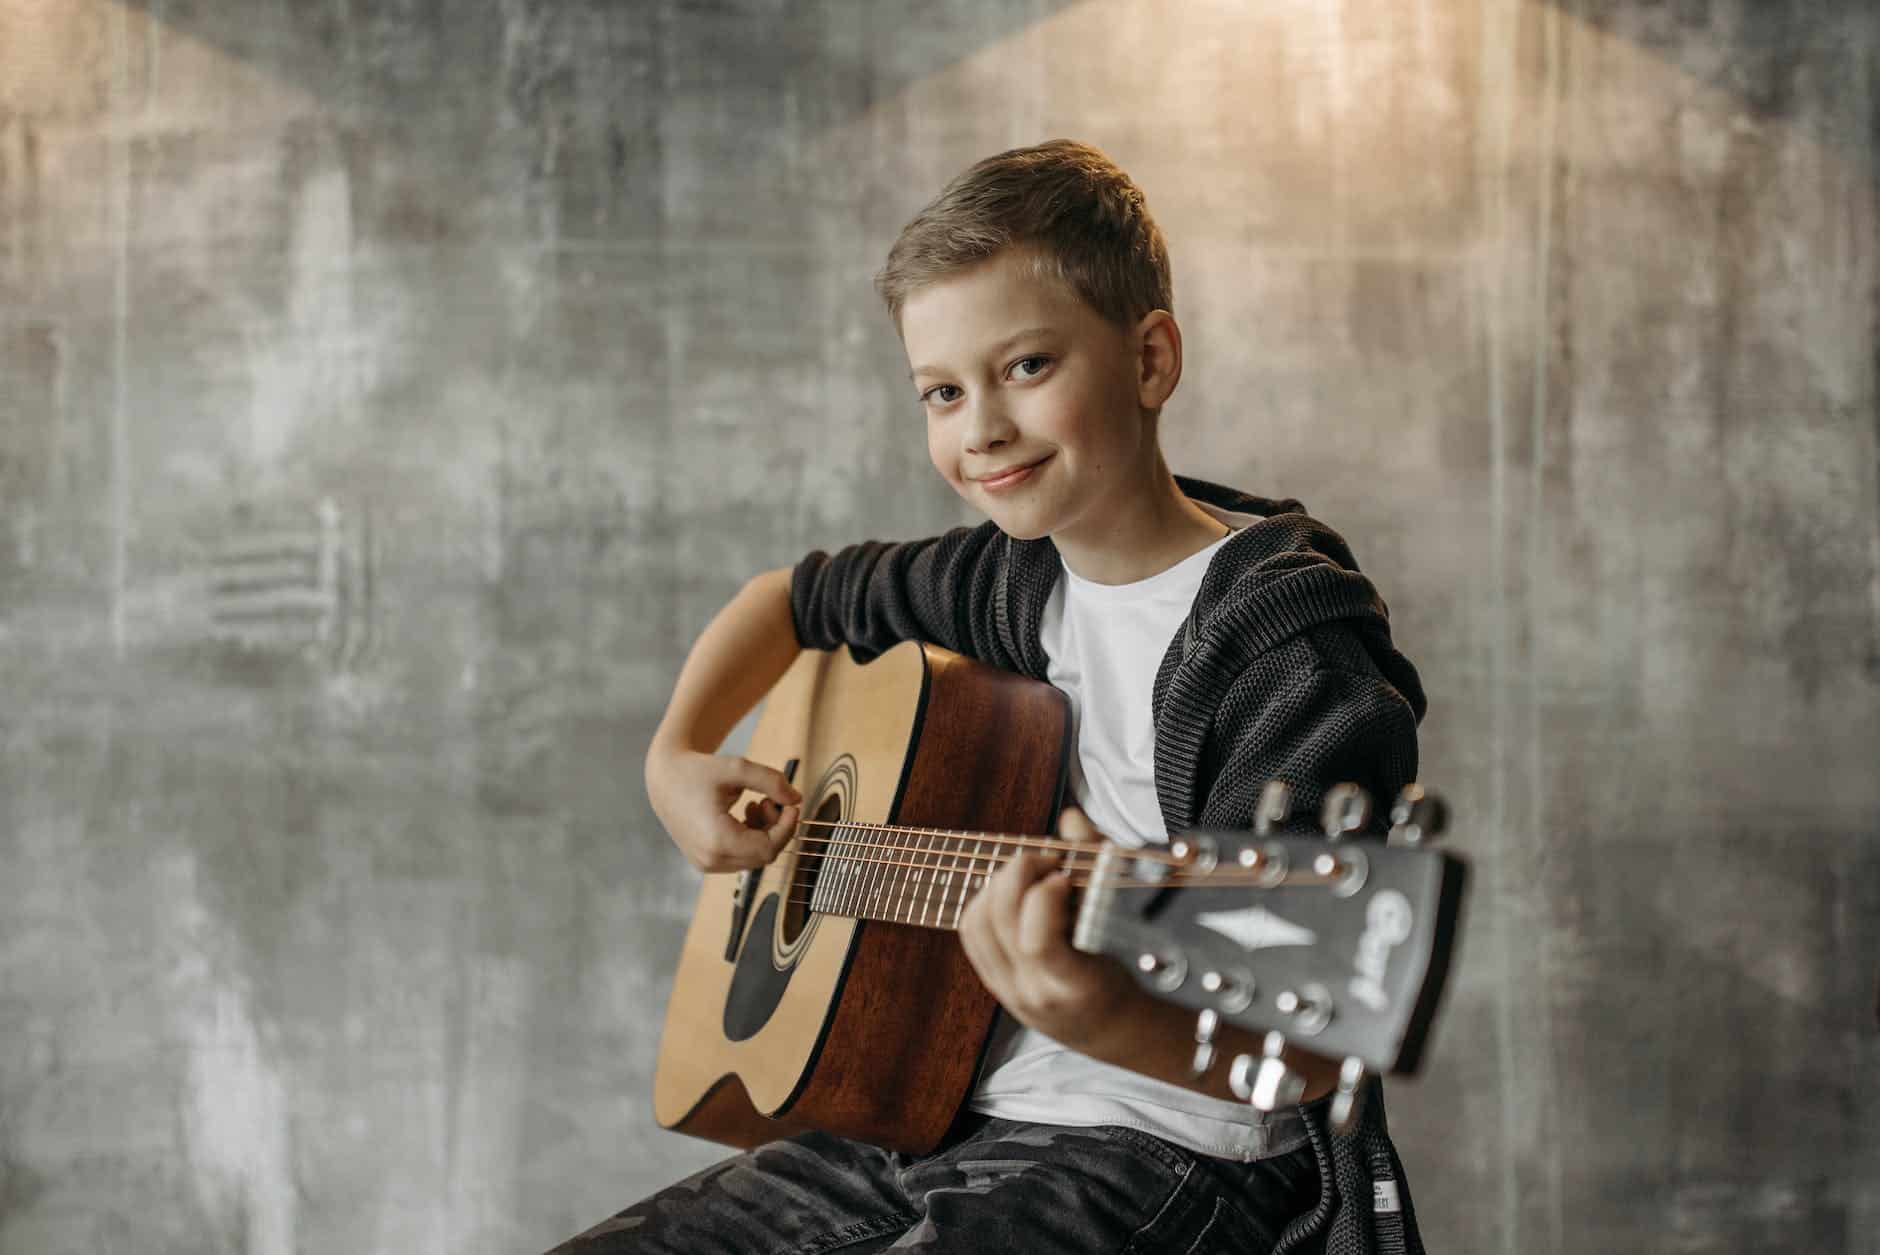 a young boy smiling while holding a guitar